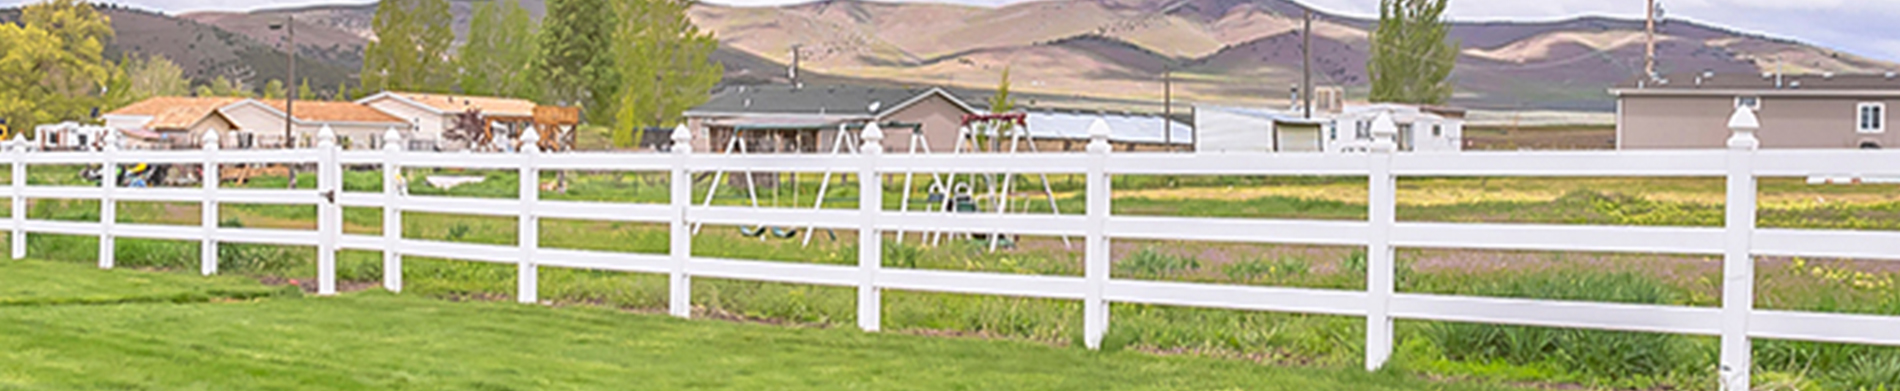 Install Duramax’s Vinyl Ranch Rail Fence Now and Enjoy 20+ Years of Maintenance-Free Living